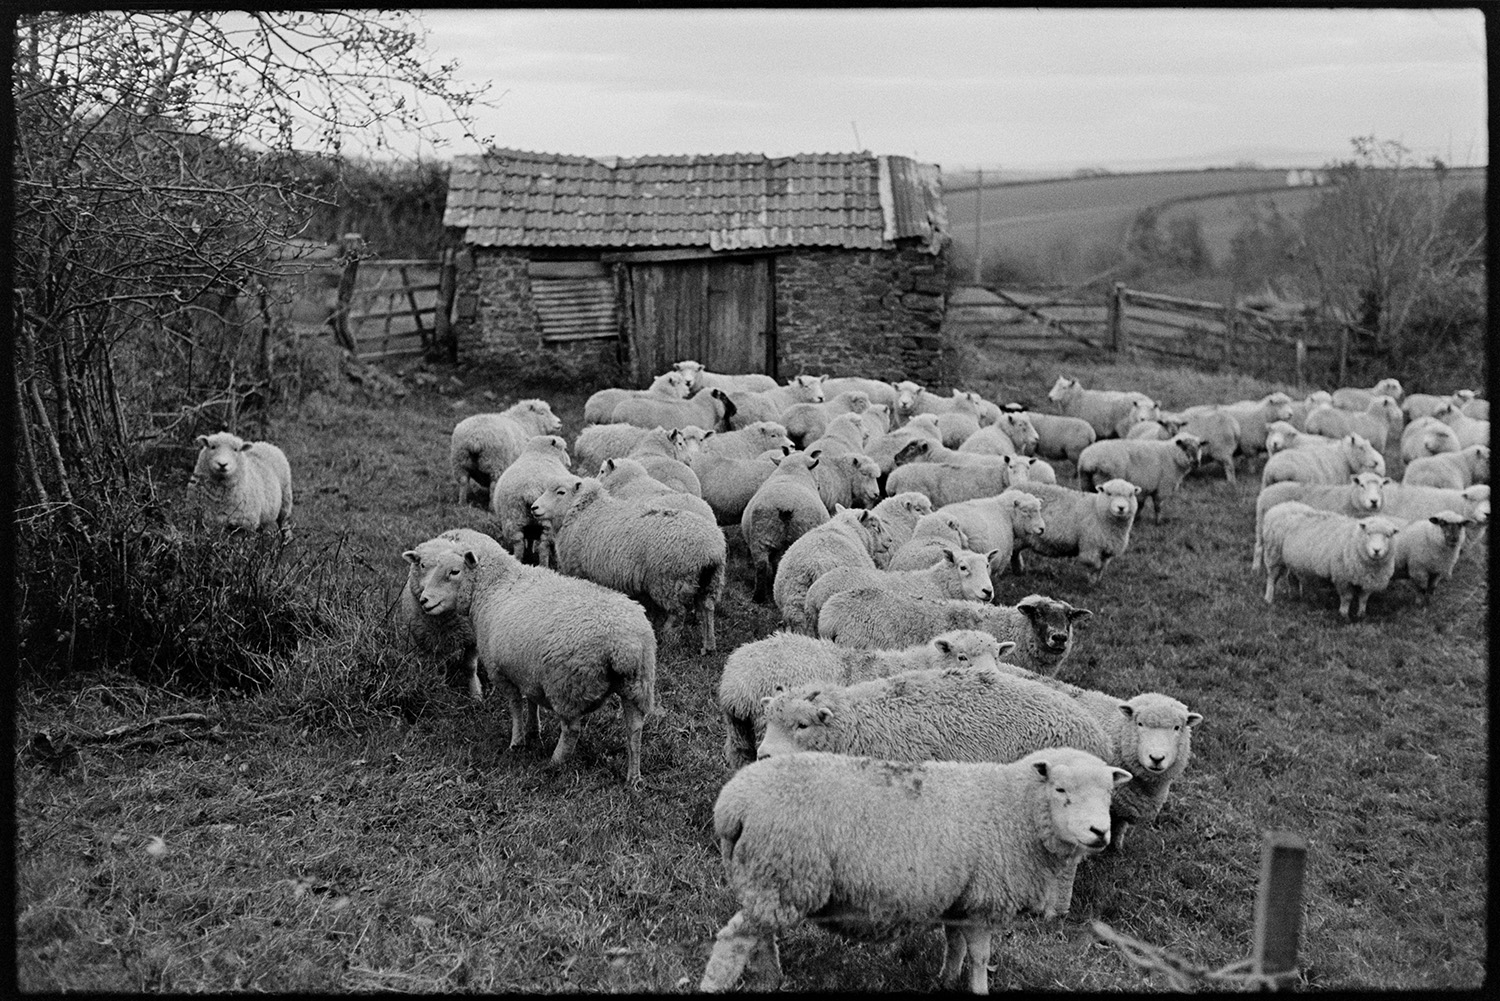 Flock of sheep in field. 
[A flock of sheep in a field by a small stone barn with a tiled roof, at Ashreigney.]